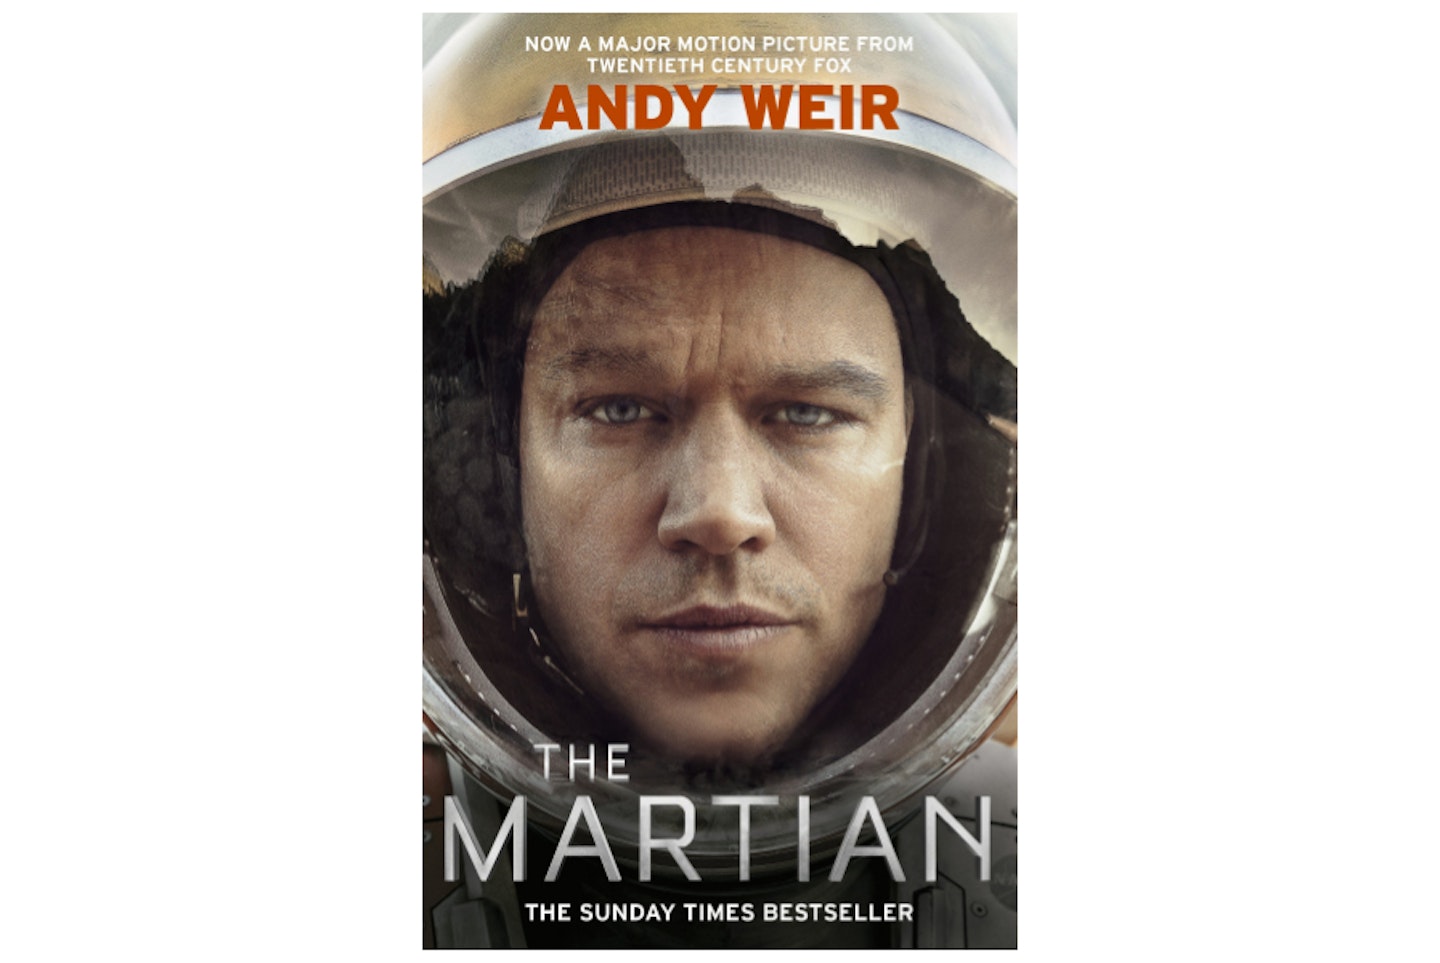 The Martian by Andy Weir, £4.49